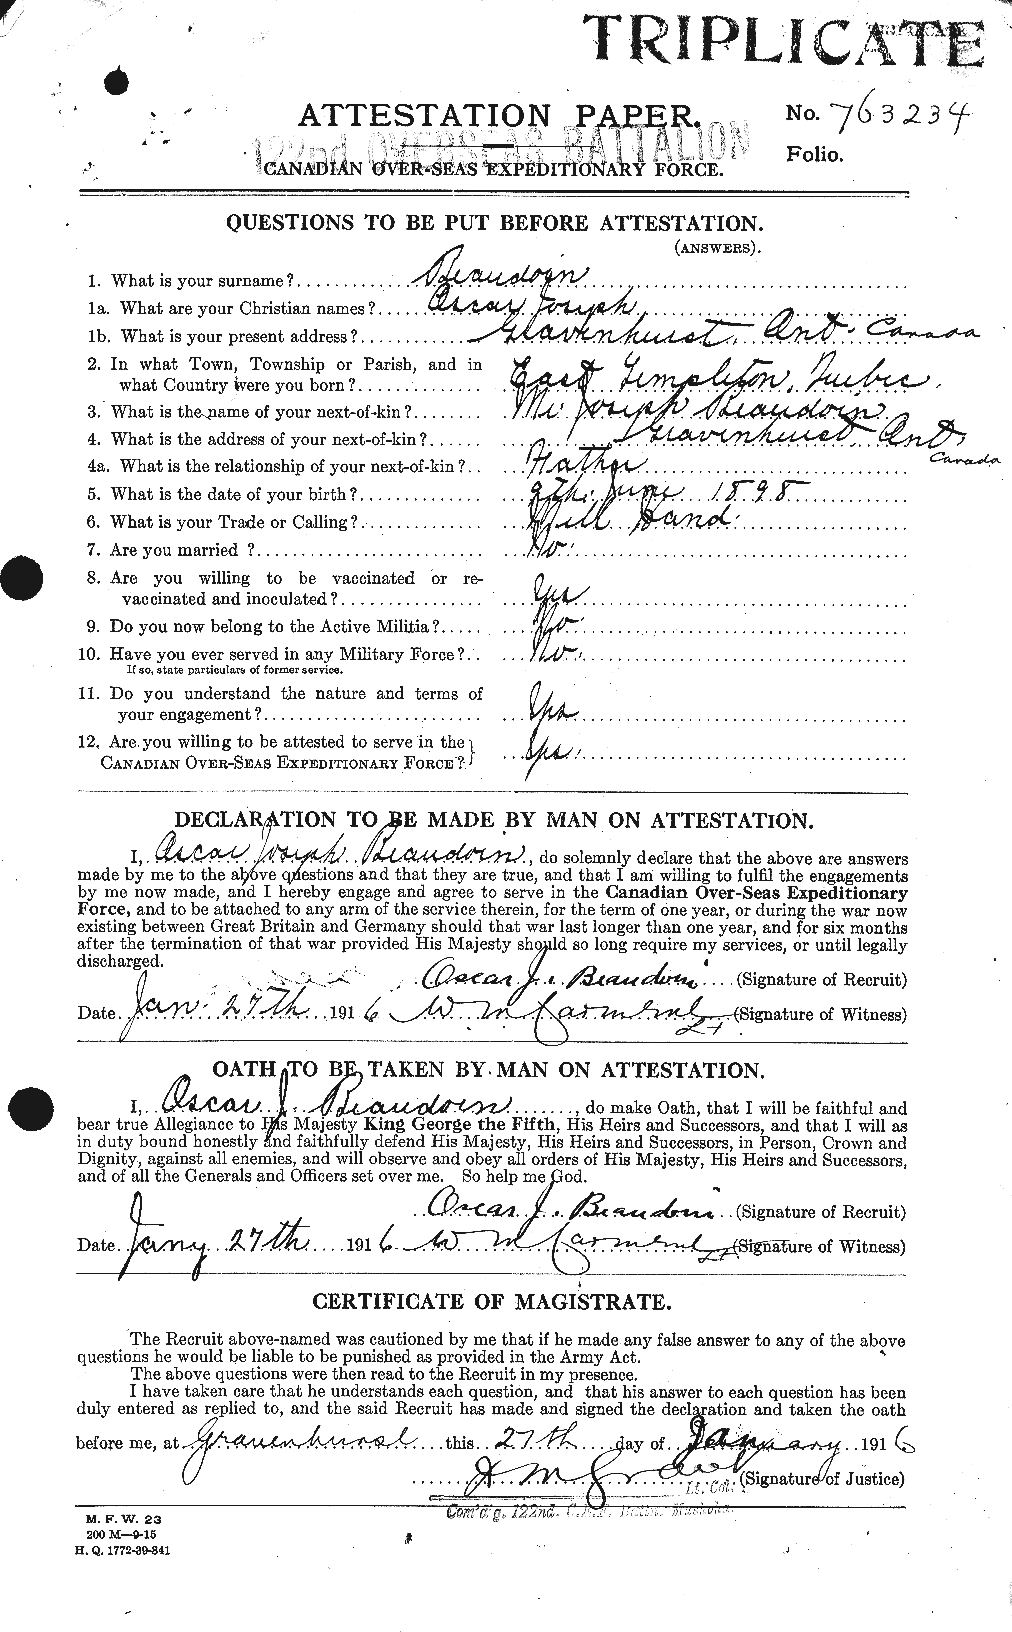 Personnel Records of the First World War - CEF 231283a